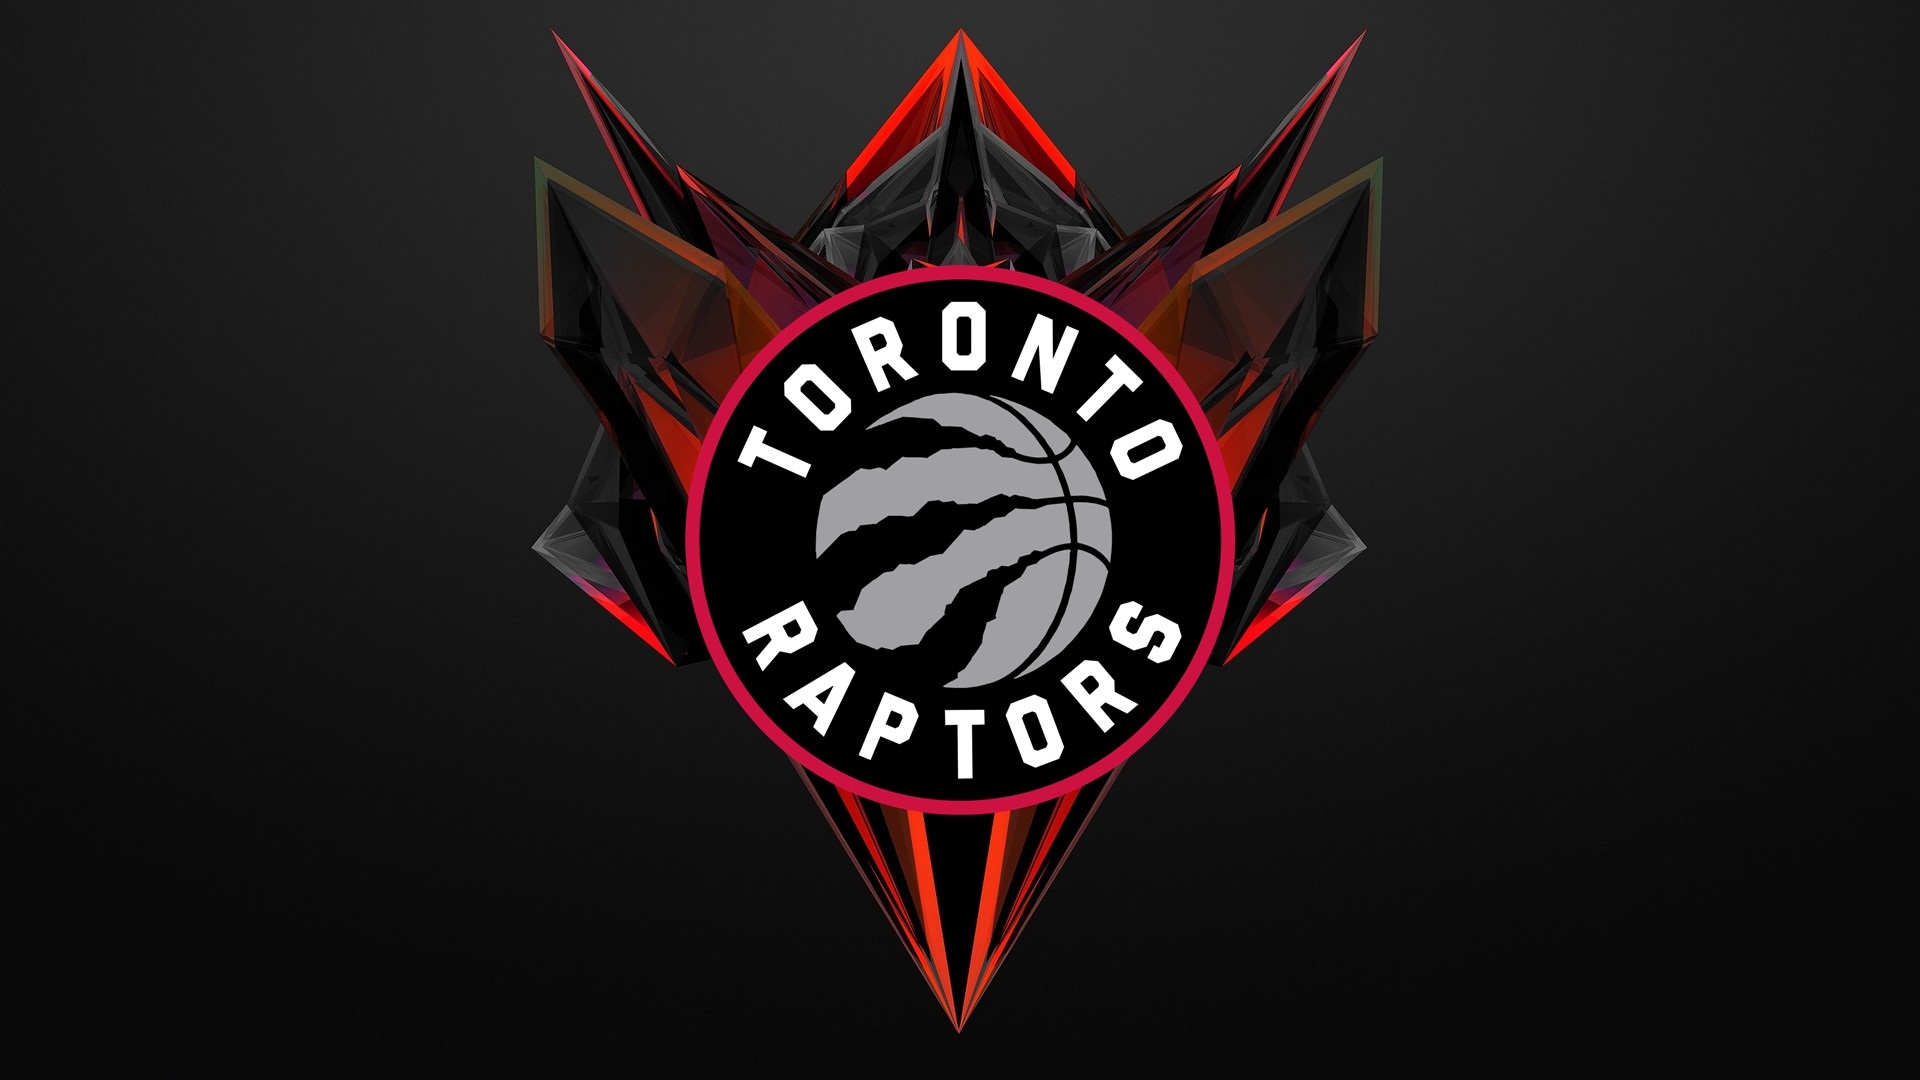 HD NBA Raptors Wallpapers with image dimensions 1920x1080 pixel. You can make this wallpaper for your Desktop Computer Backgrounds, Windows or Mac Screensavers, iPhone Lock screen, Tablet or Android and another Mobile Phone device